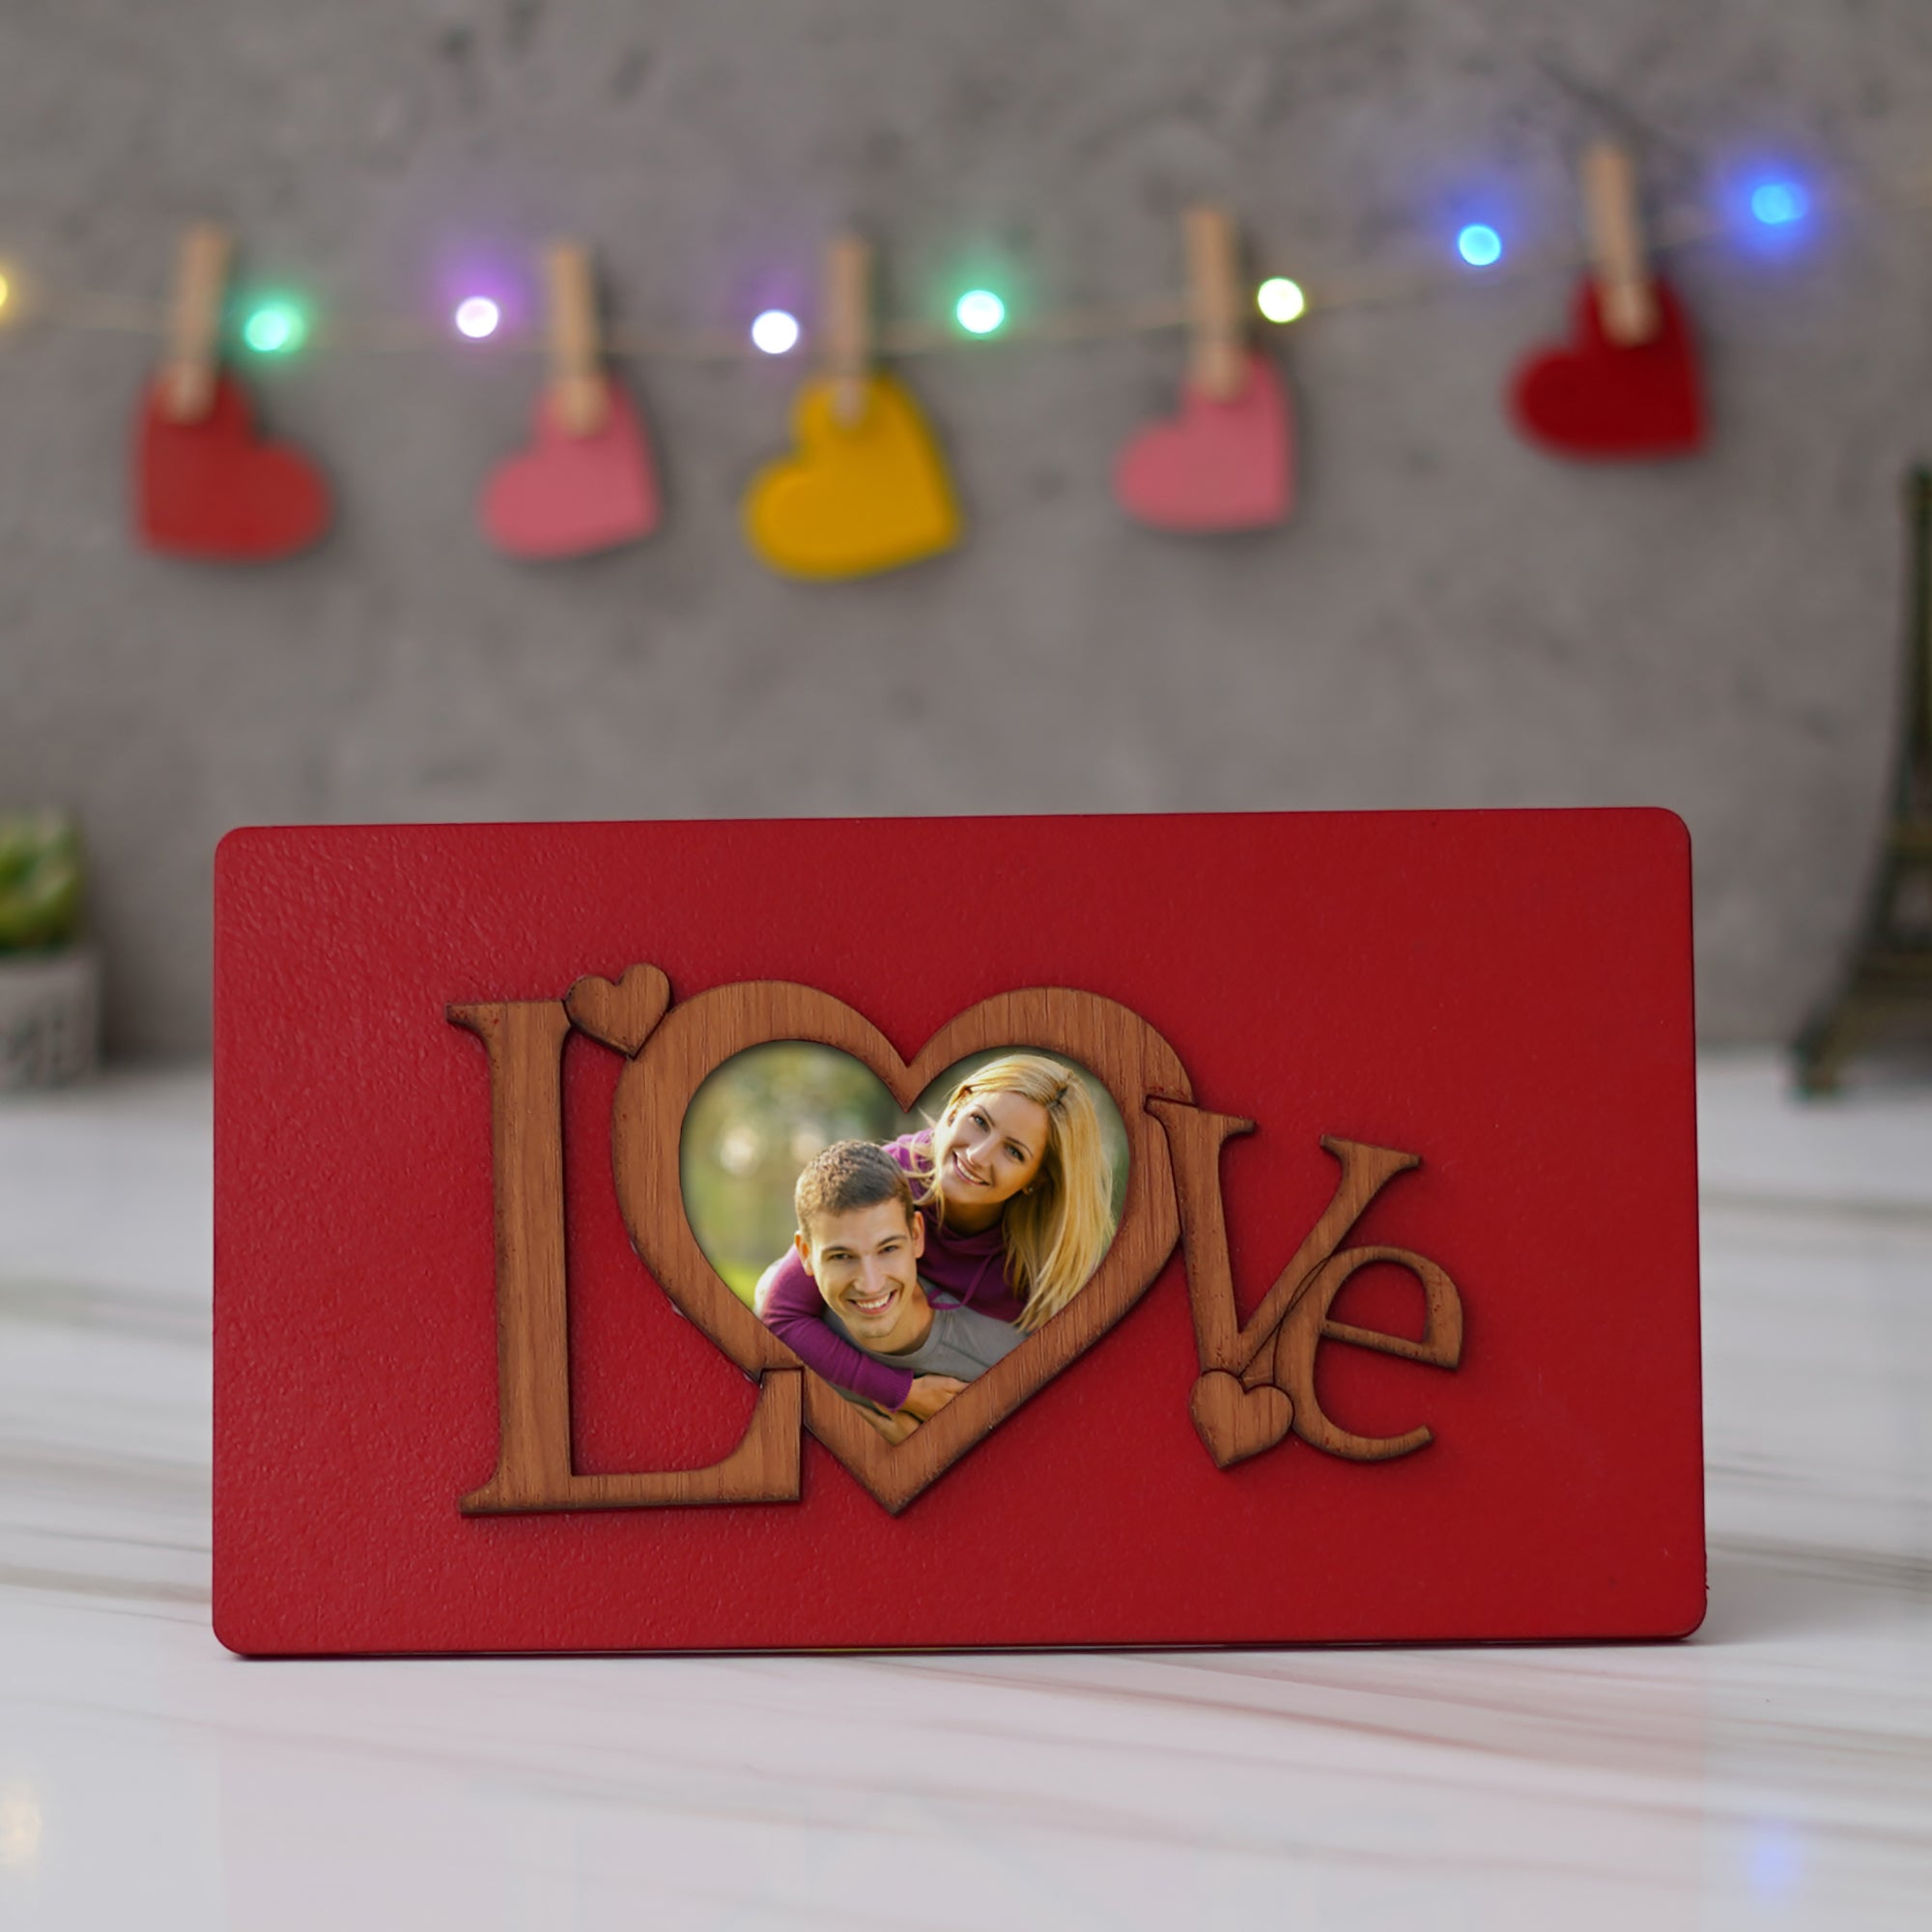 Valentine Combo of Pack of 8 Love Gift Cards, "Love" Wooden Photo Frame With Red Stand, Pink Heart Shaped Gift Box with Teddy and Roses 3